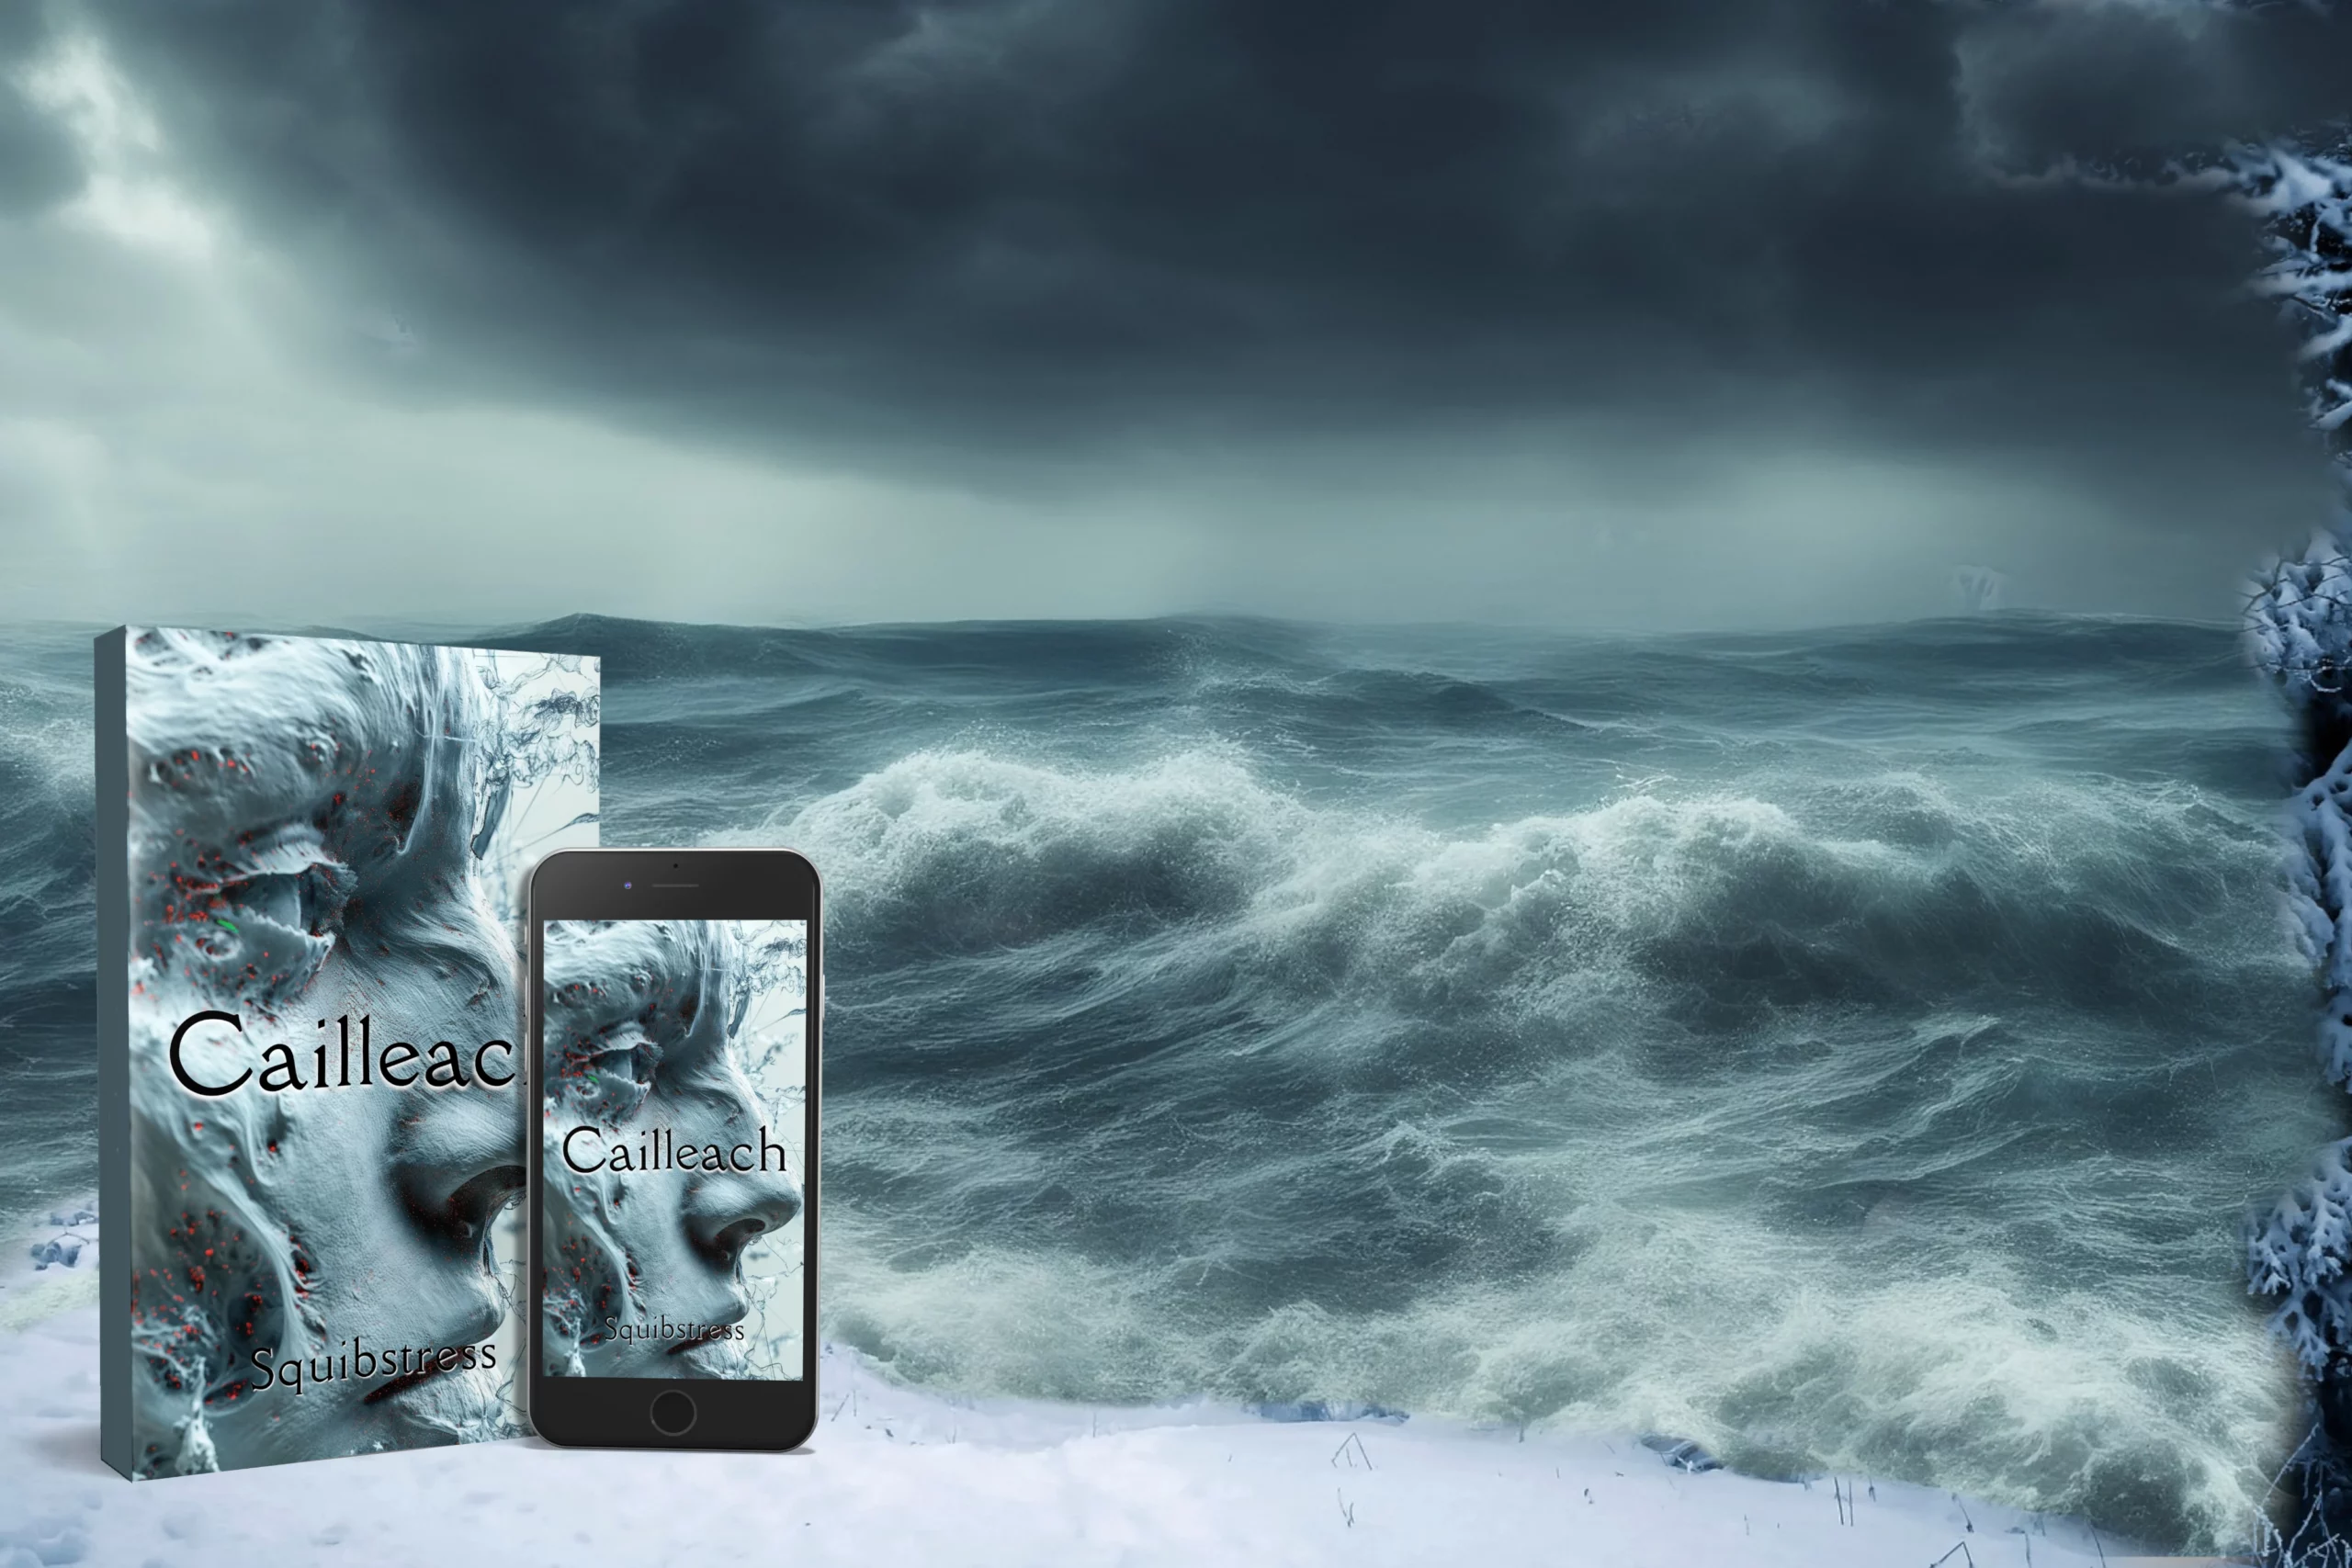 Paperback book and iPhone with book -- Cailleach -- against a stormy sea